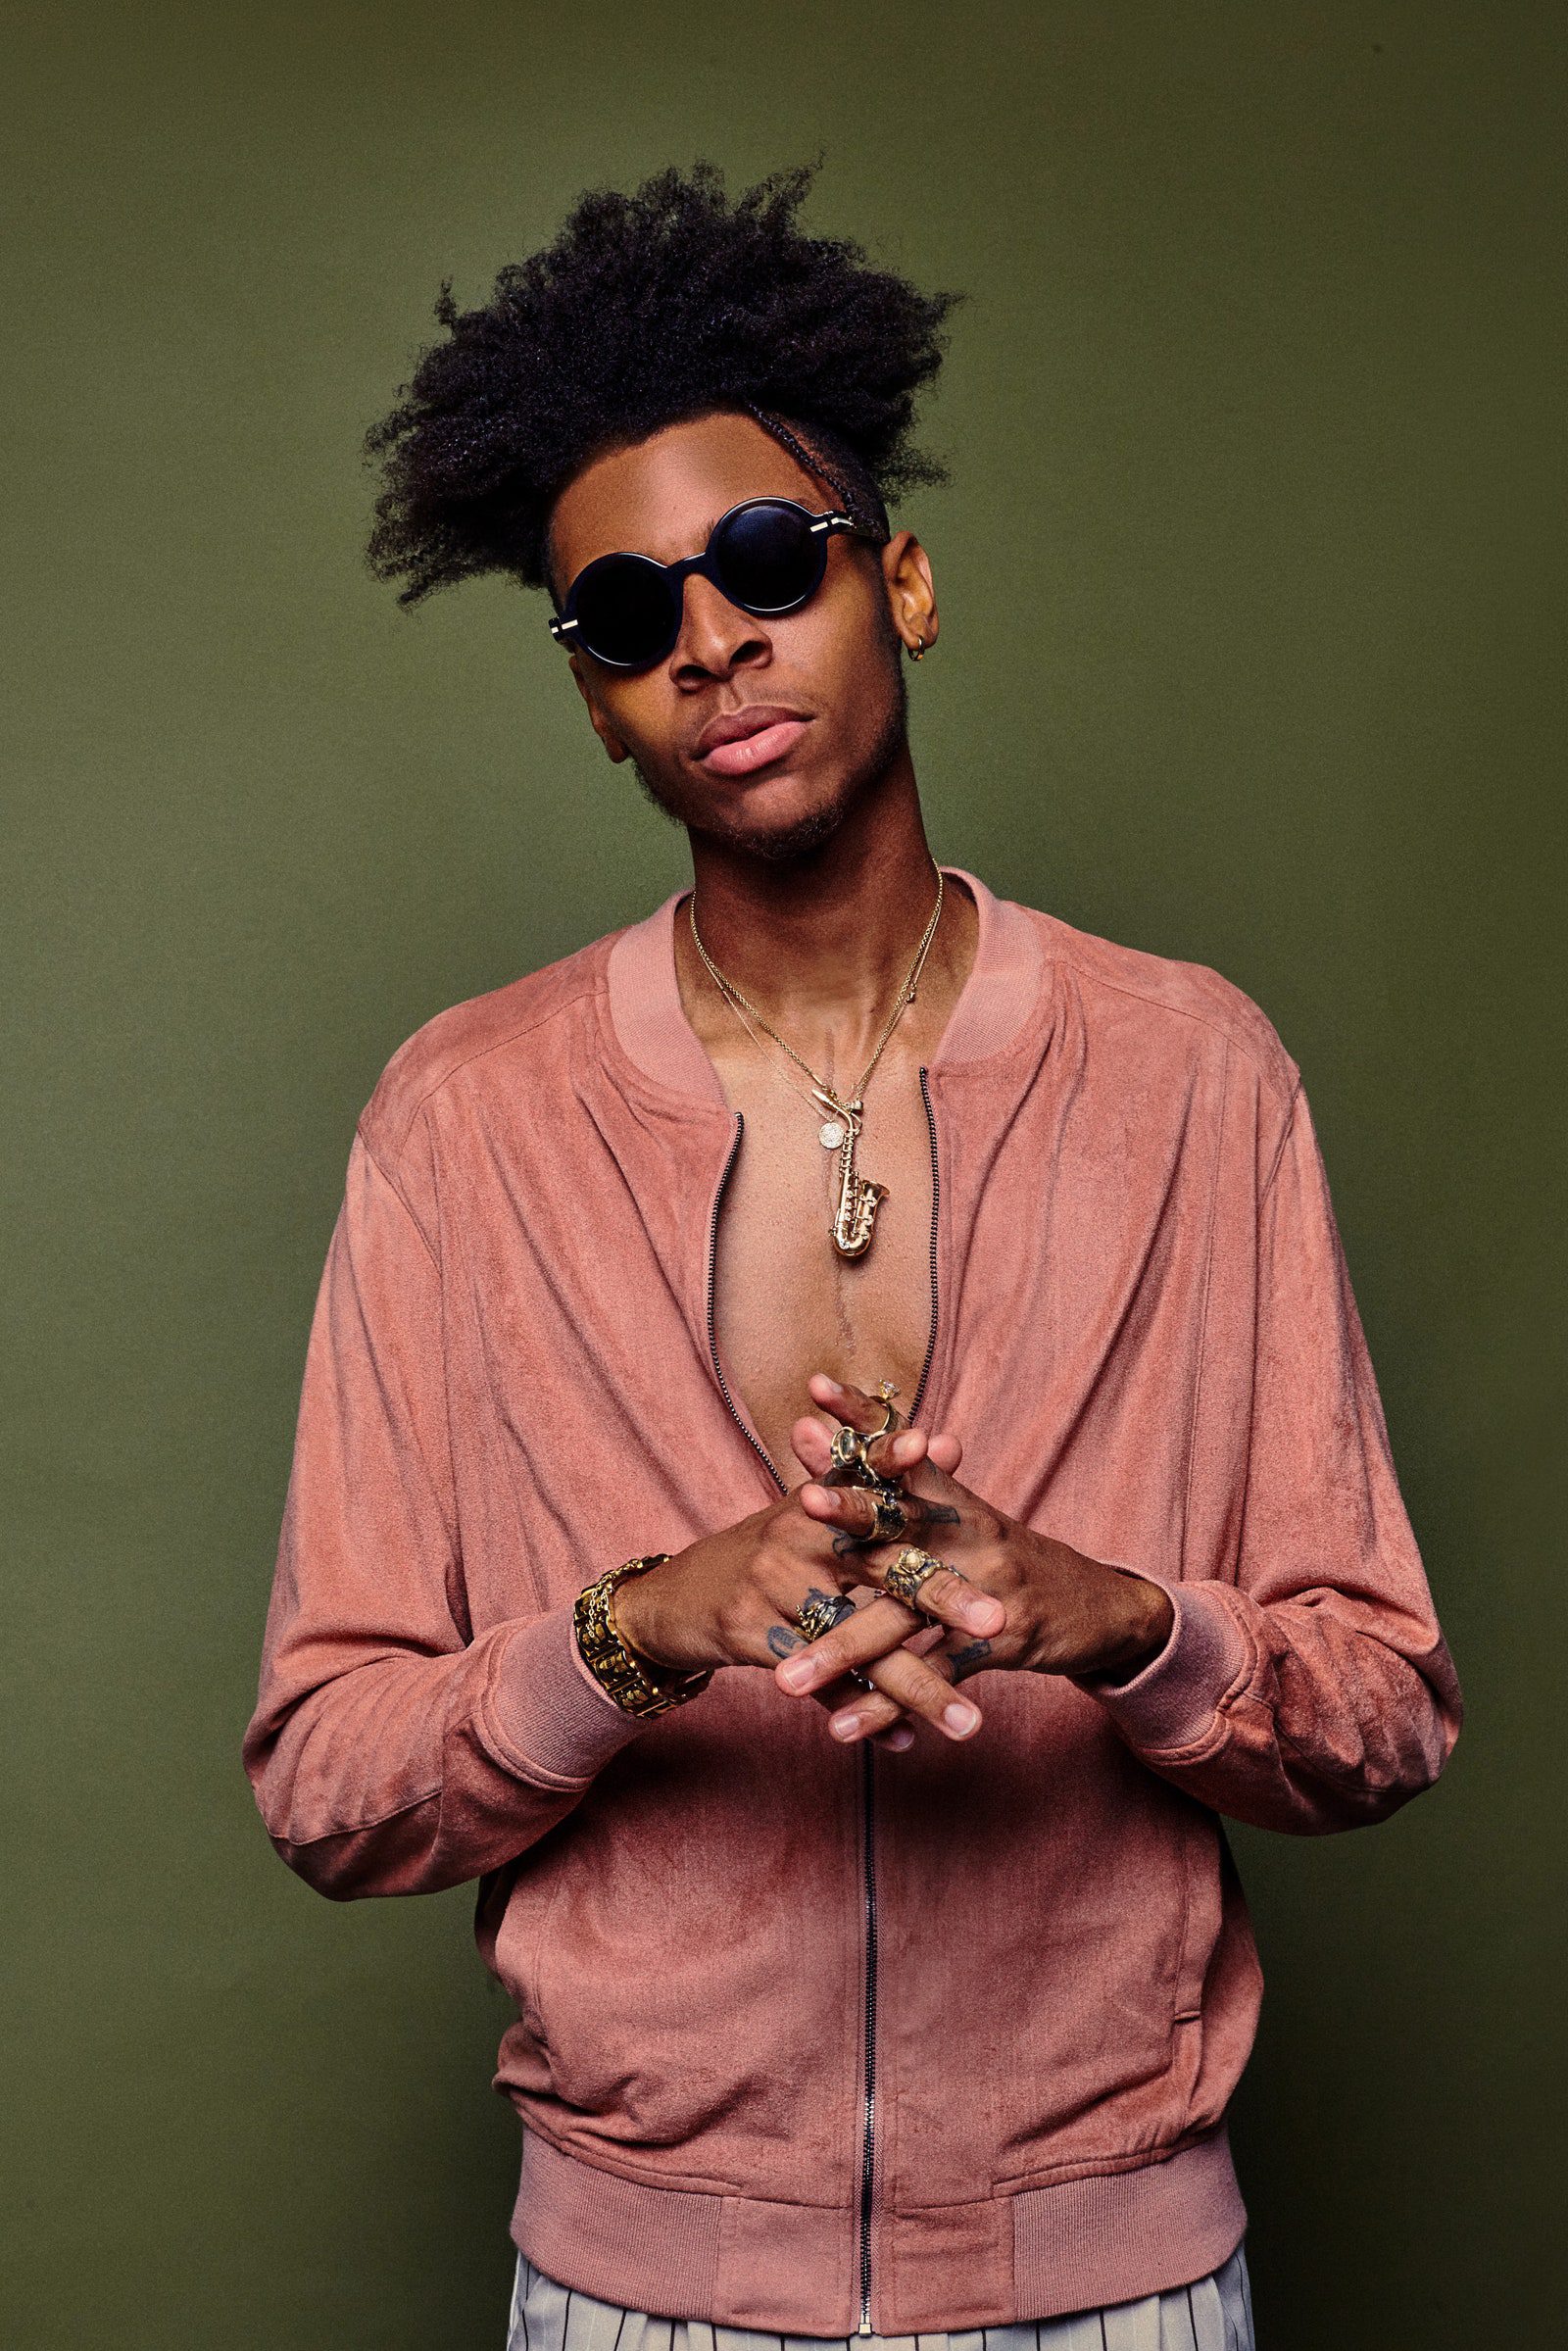 New Music You Need to Hear: Masego